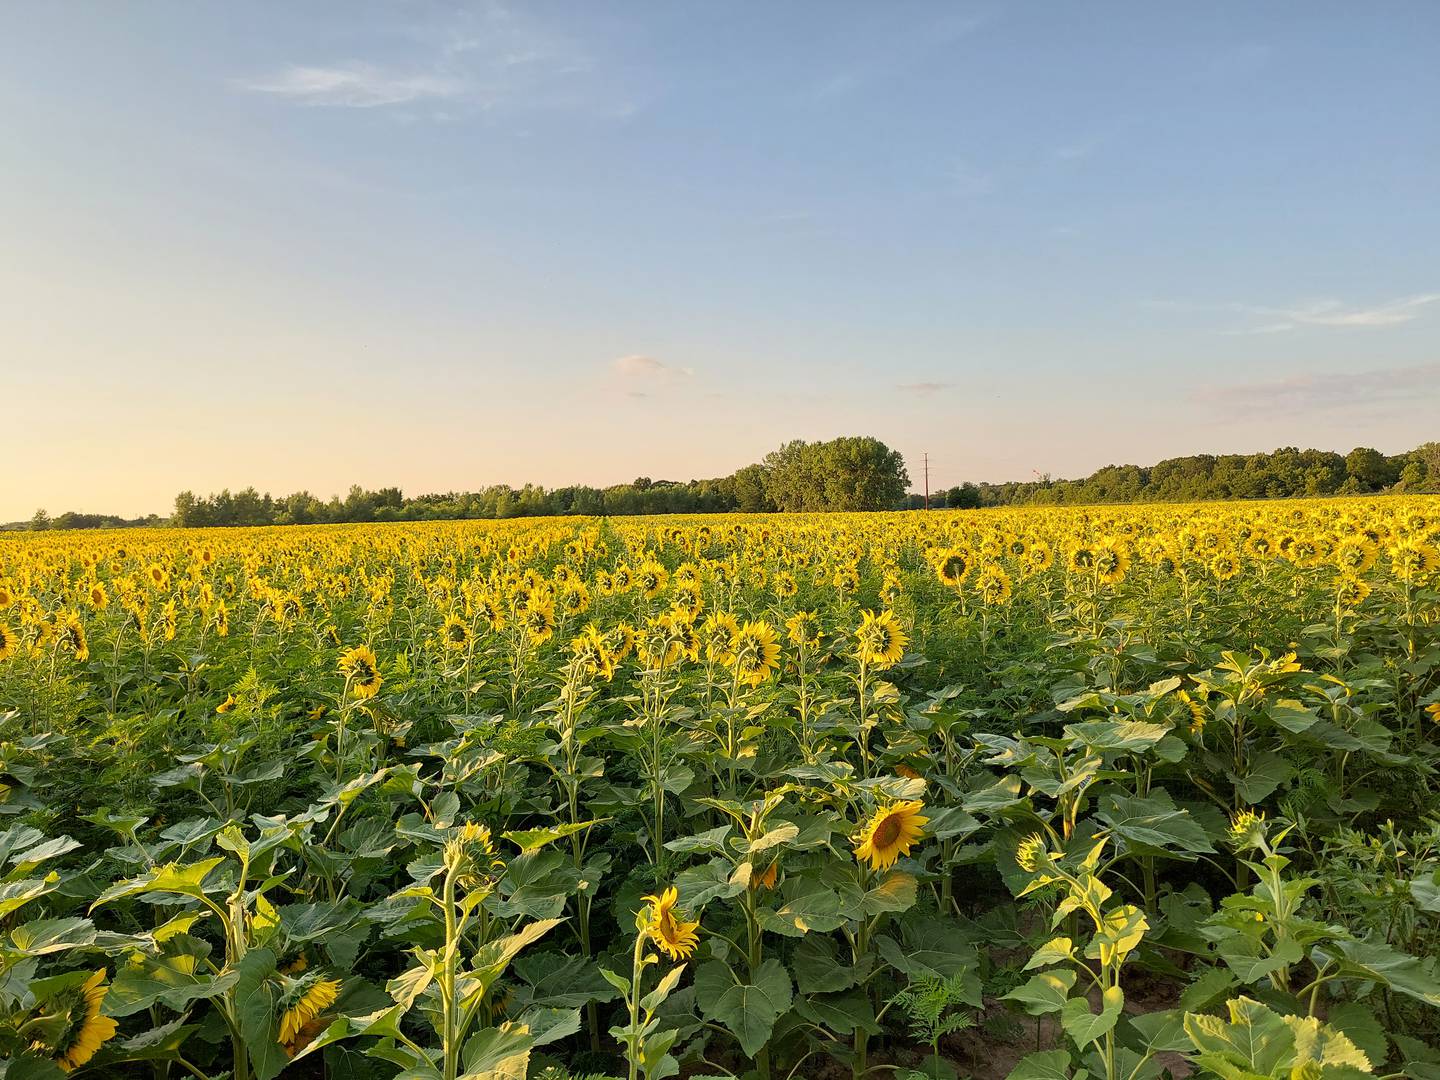 A vast field of sunflowers bloom Thursday, July 6, 2023, at Matthiessen State Park. The sunflowers are planted every year and bloom in July.